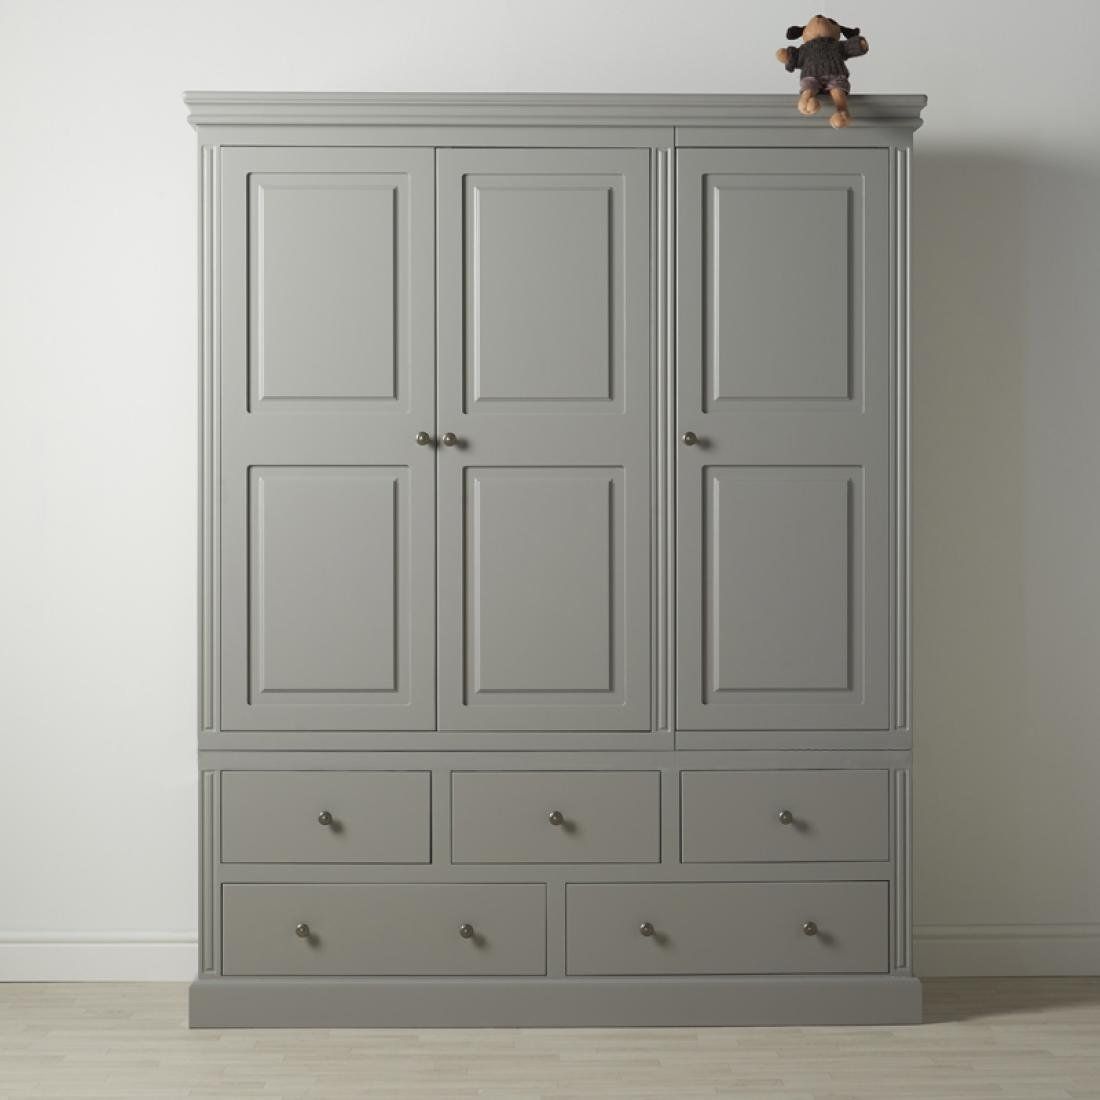 Archie 3 Door 5 Drawer Wardrobe | Boys Wardrobes | Kids Bedrooms |  Childrens Furniture Throughout Wardrobes With 3 Drawers (View 10 of 15)